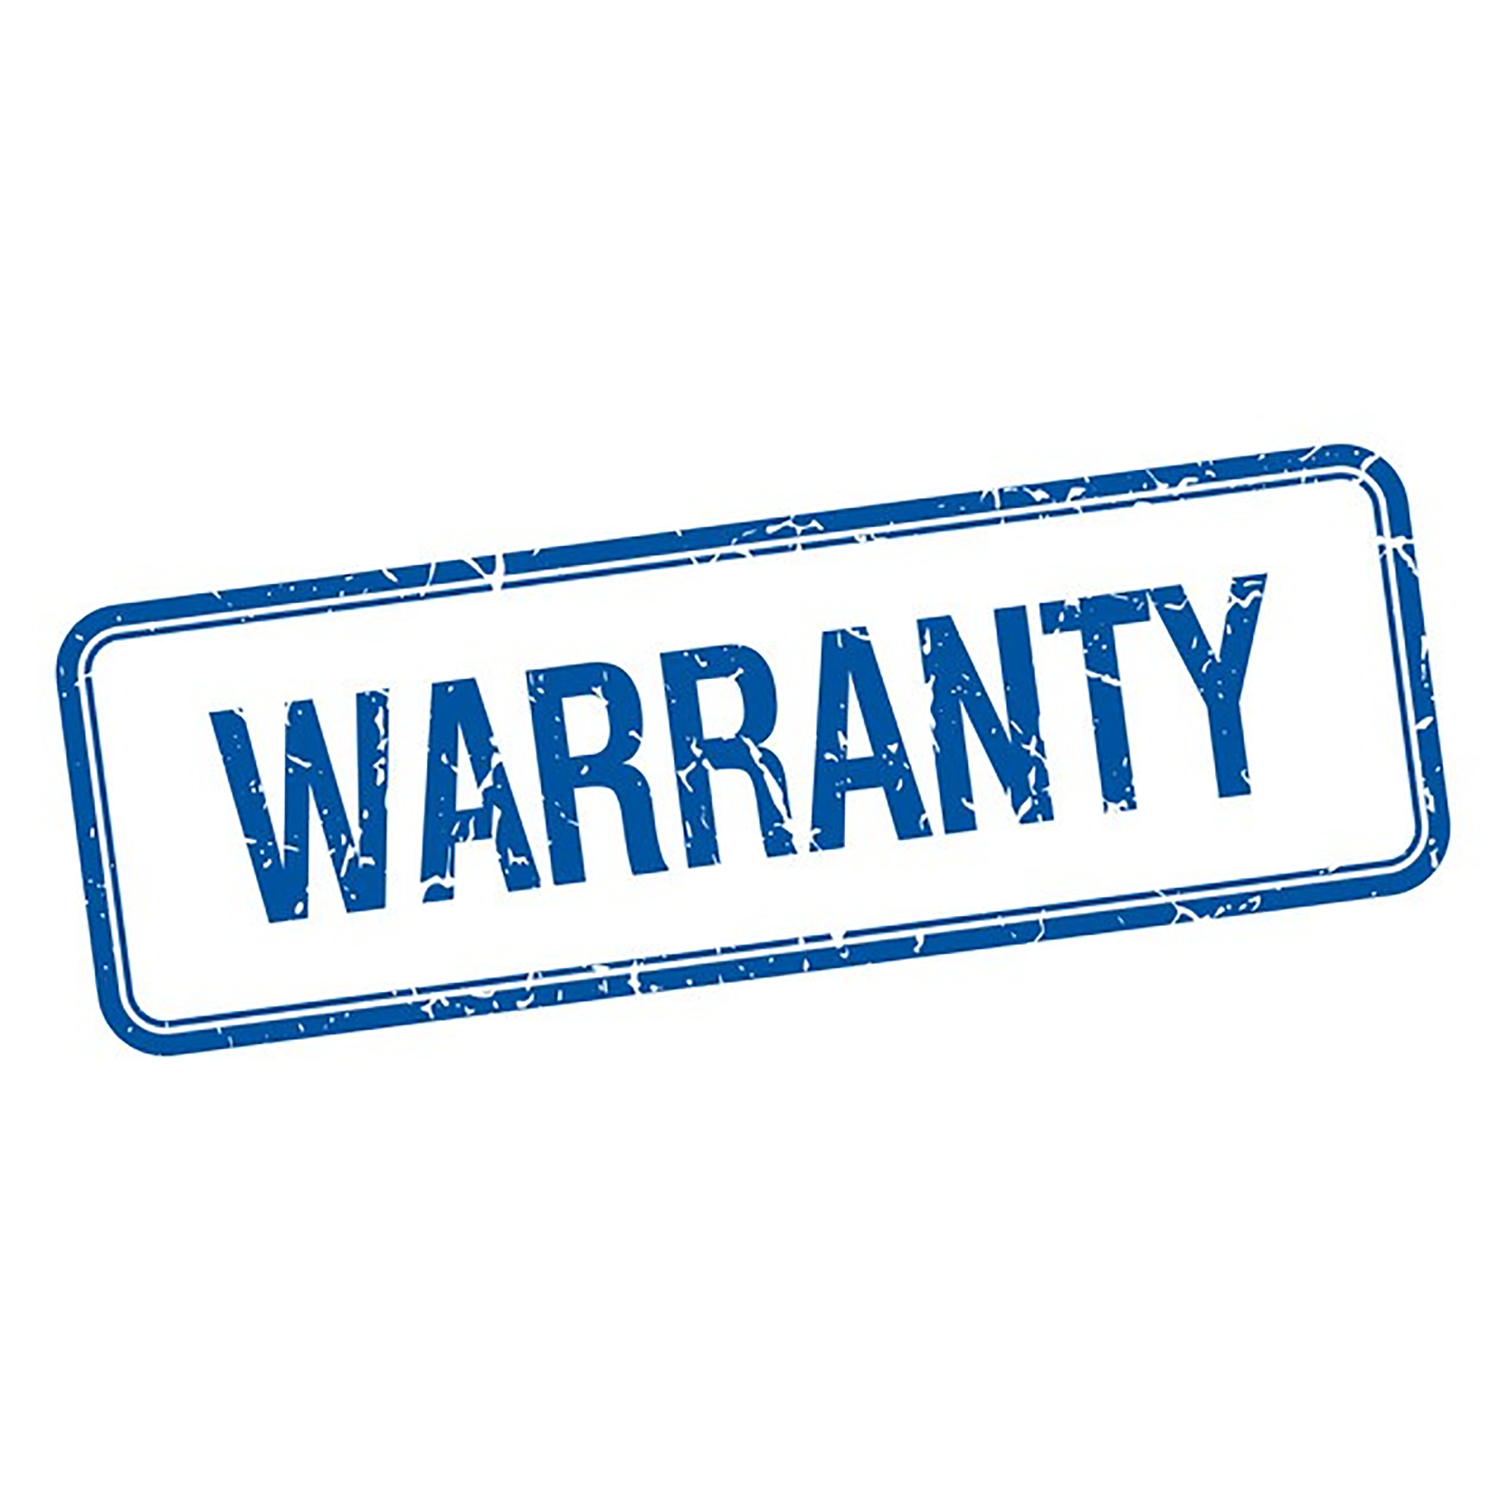 Extended 2 year comprehensive warranty for the secaCT8000i-2